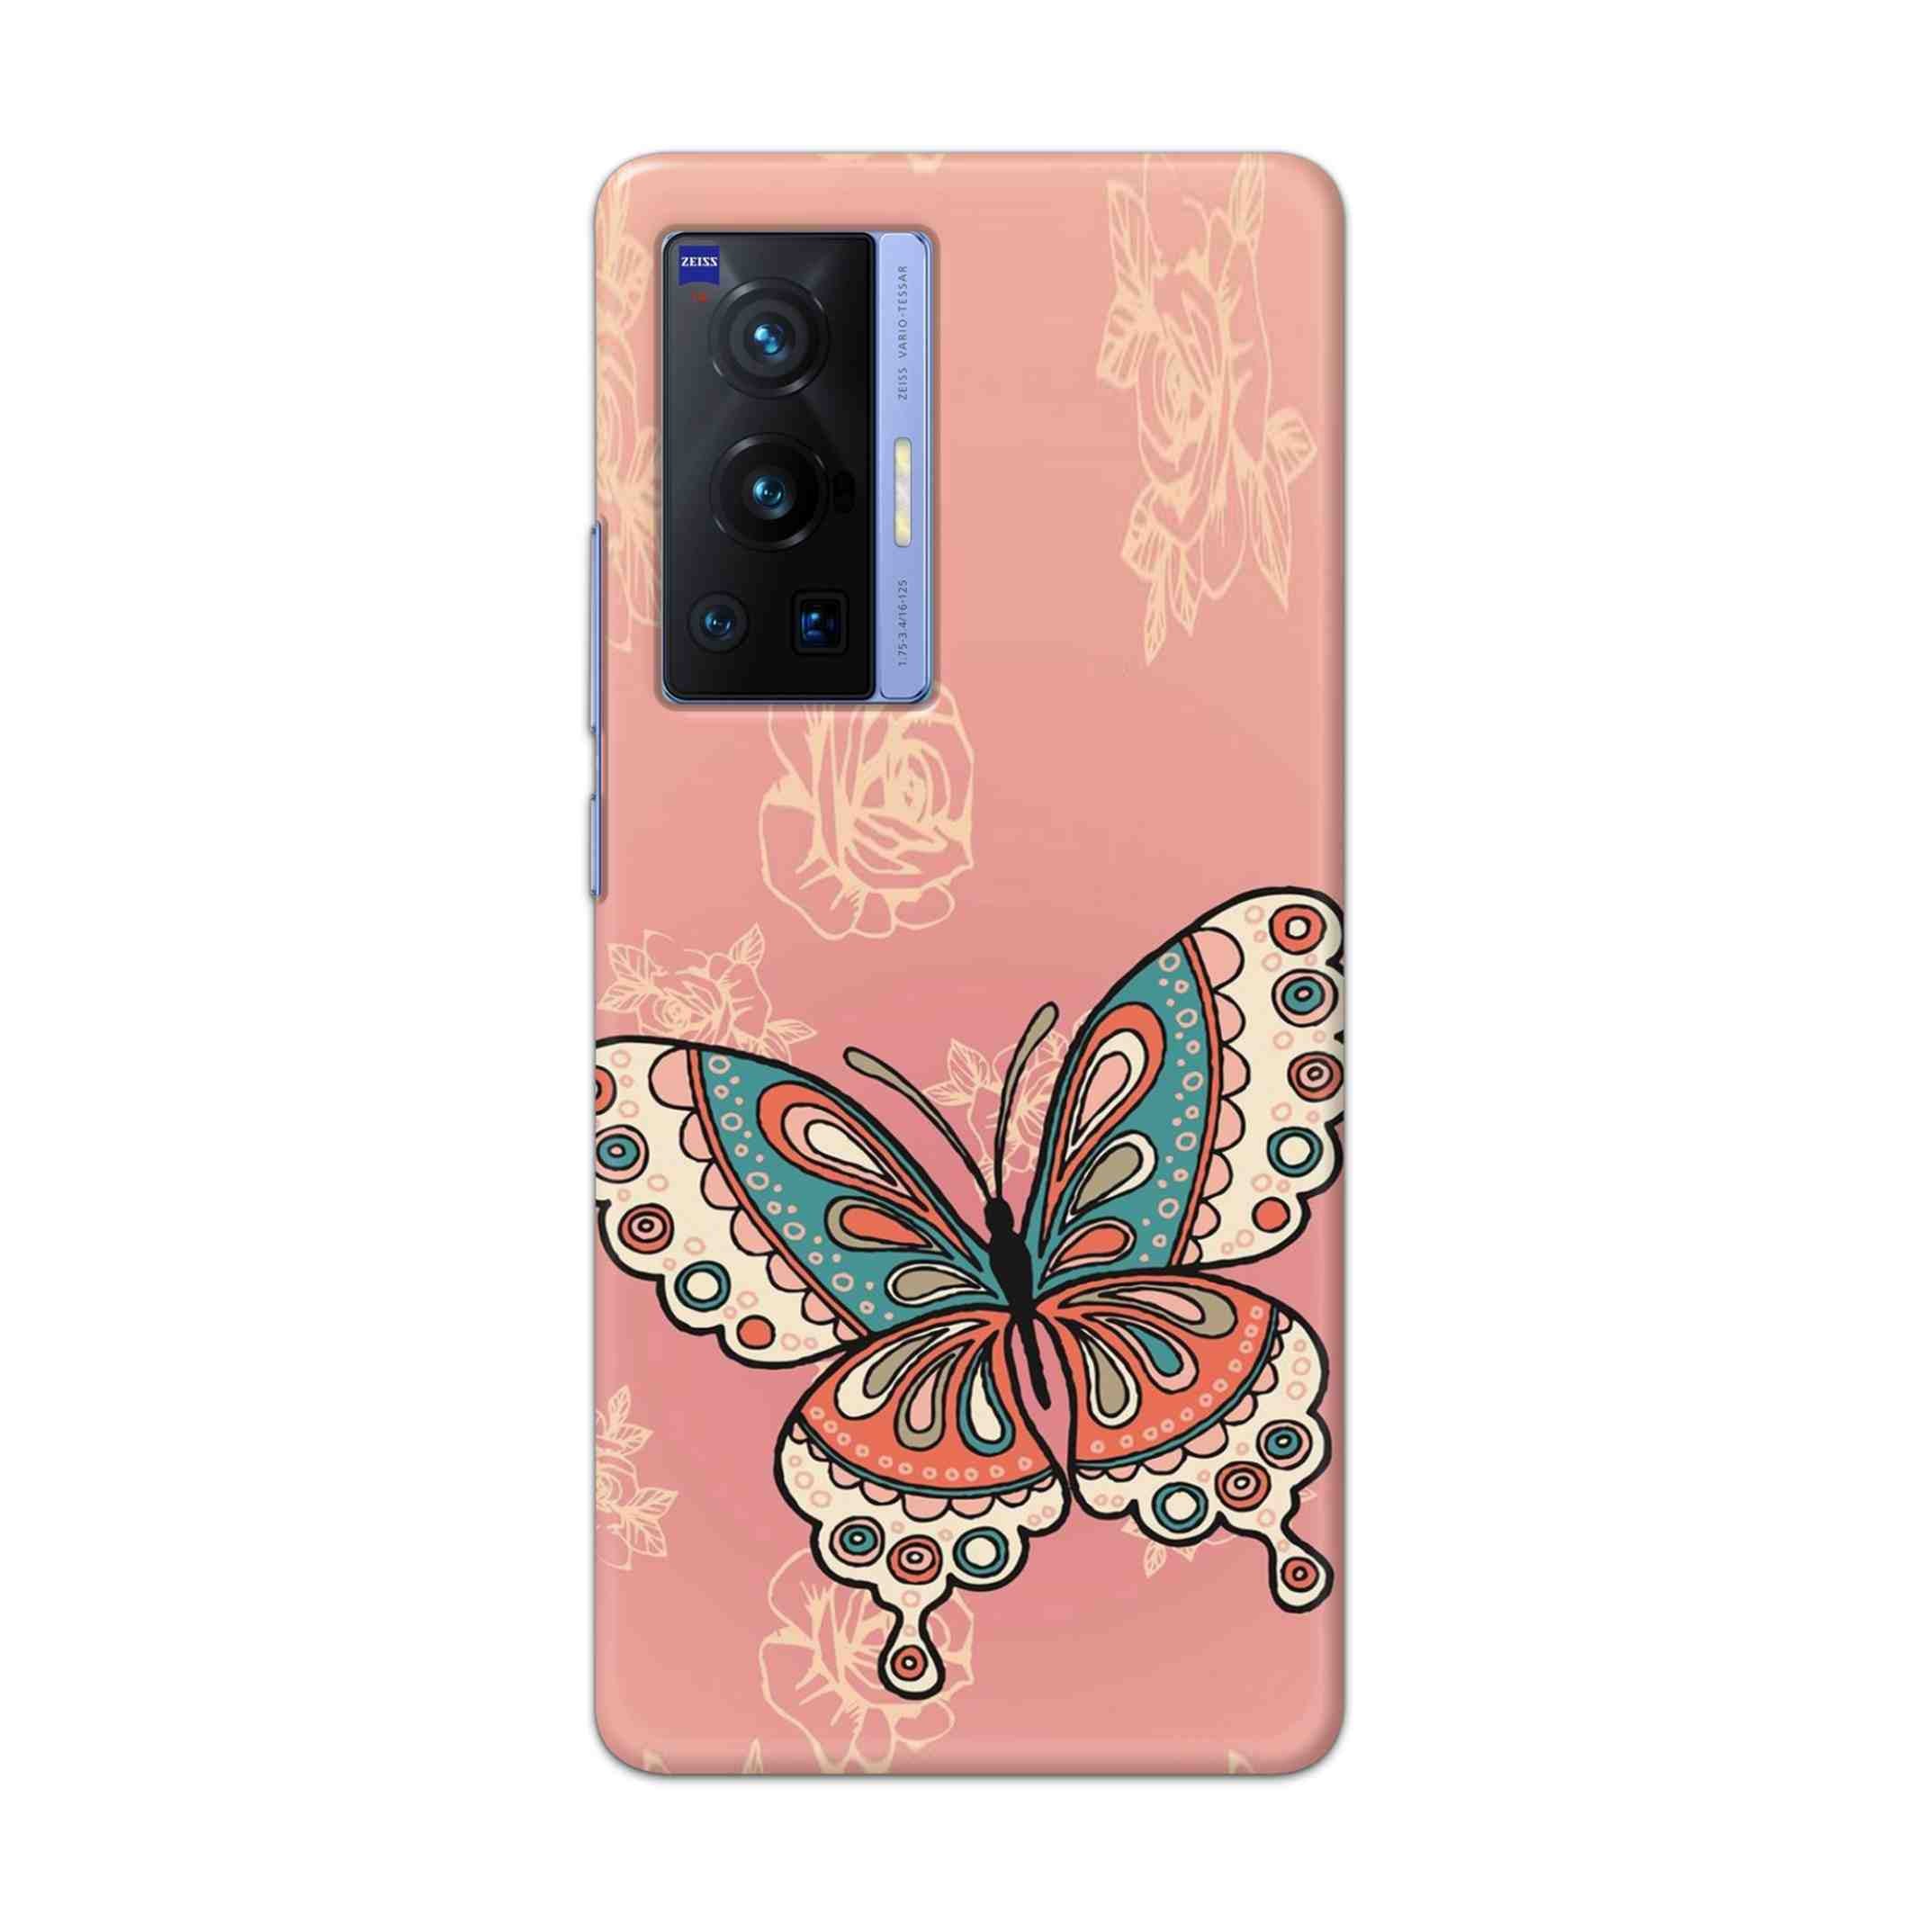 Buy Butterfly Hard Back Mobile Phone Case Cover For Vivo X70 Pro Online